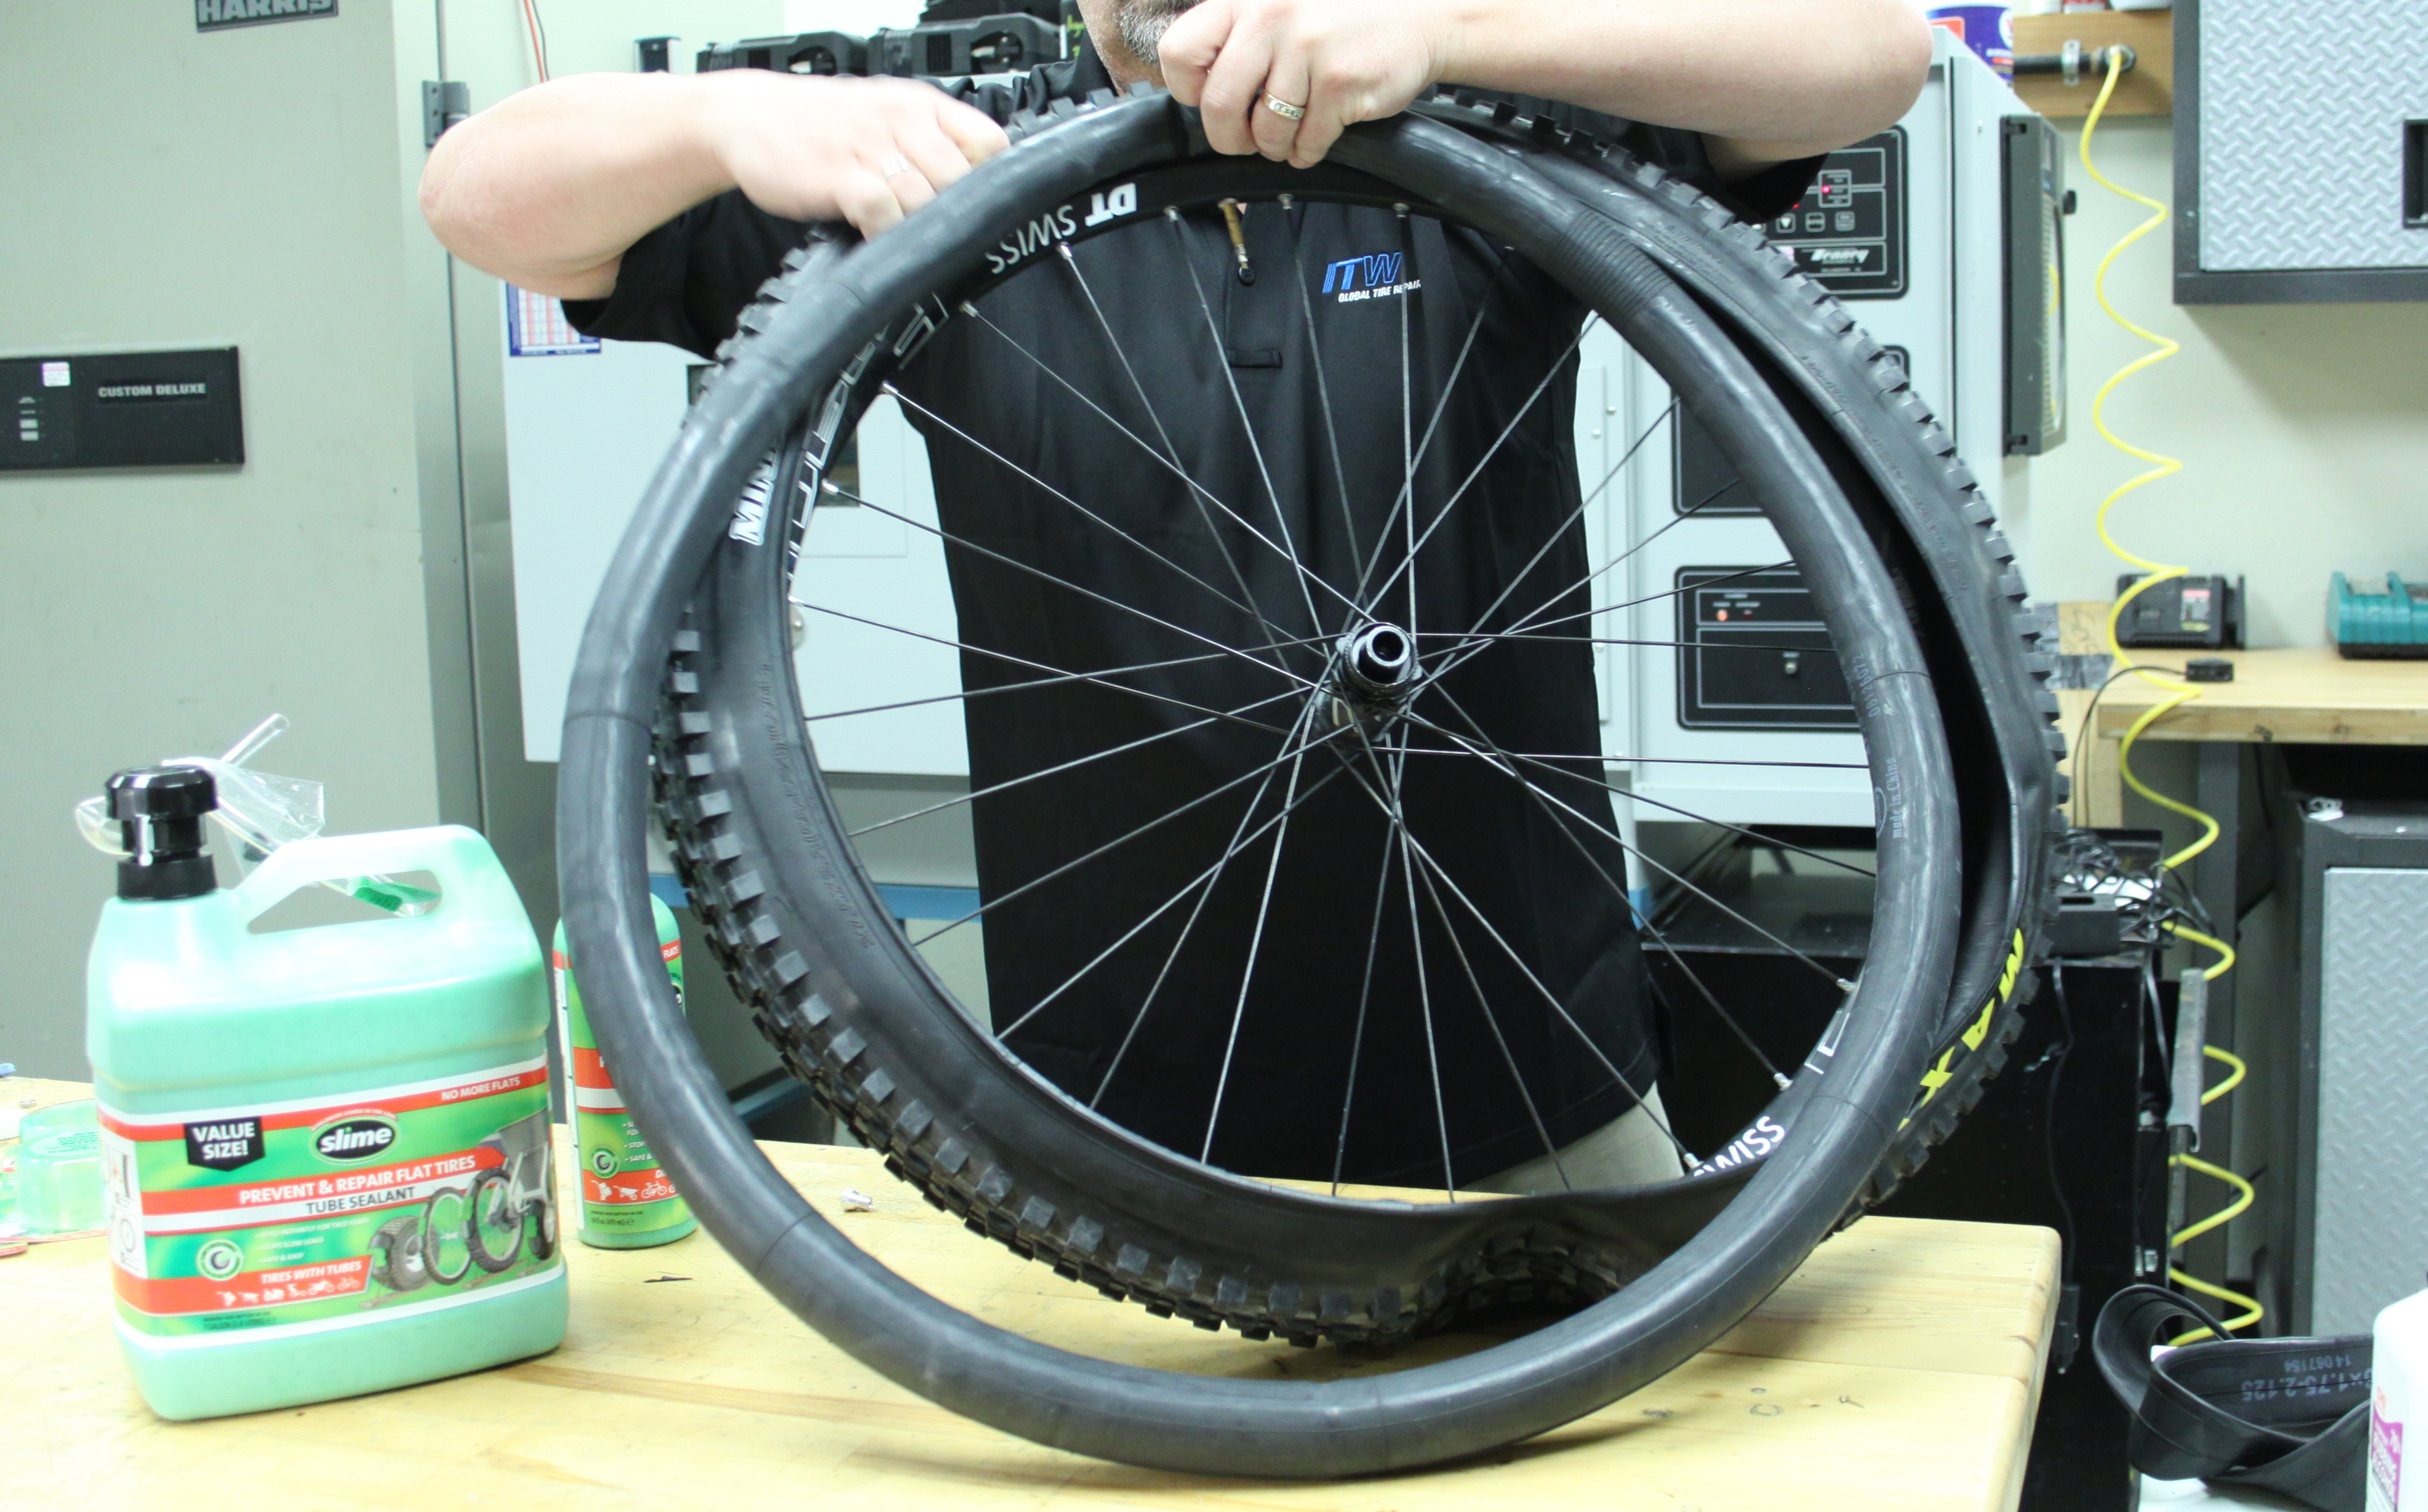 Re-assembling a bicycle tire with a new tube